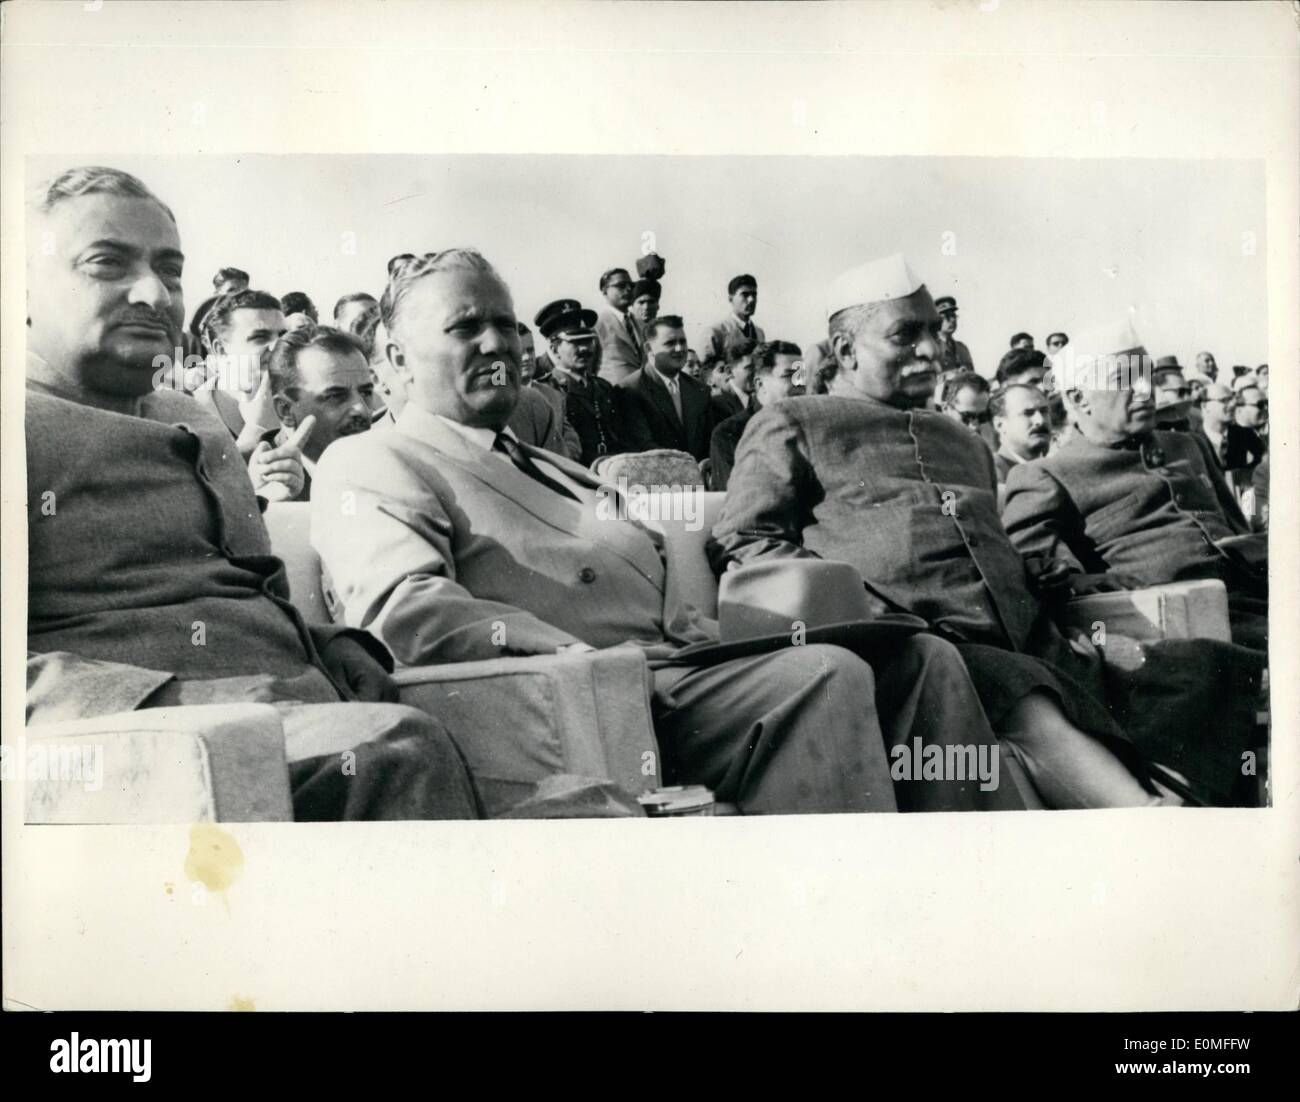 Dec. 12, 1954 - Marshal Tito on his State visit to India watches mounted display in New Delhi: Continuing his State visit to India Marshal Tito, President of the Jugo Slavian Republic attended a display of Mounted Sports at New Delhi. He was accompanied by the President of India, the Prime Minister and General Rajendrasinhji. Photo shows watching the Mounted Sports at New Delhi are left to right : General Rajendrasinhji, Marshal Tito, Dr. Rajendra Prasad (Prof. of India), and Mr. Jawaharlal Nehru the Prime Minister. Stock Photo